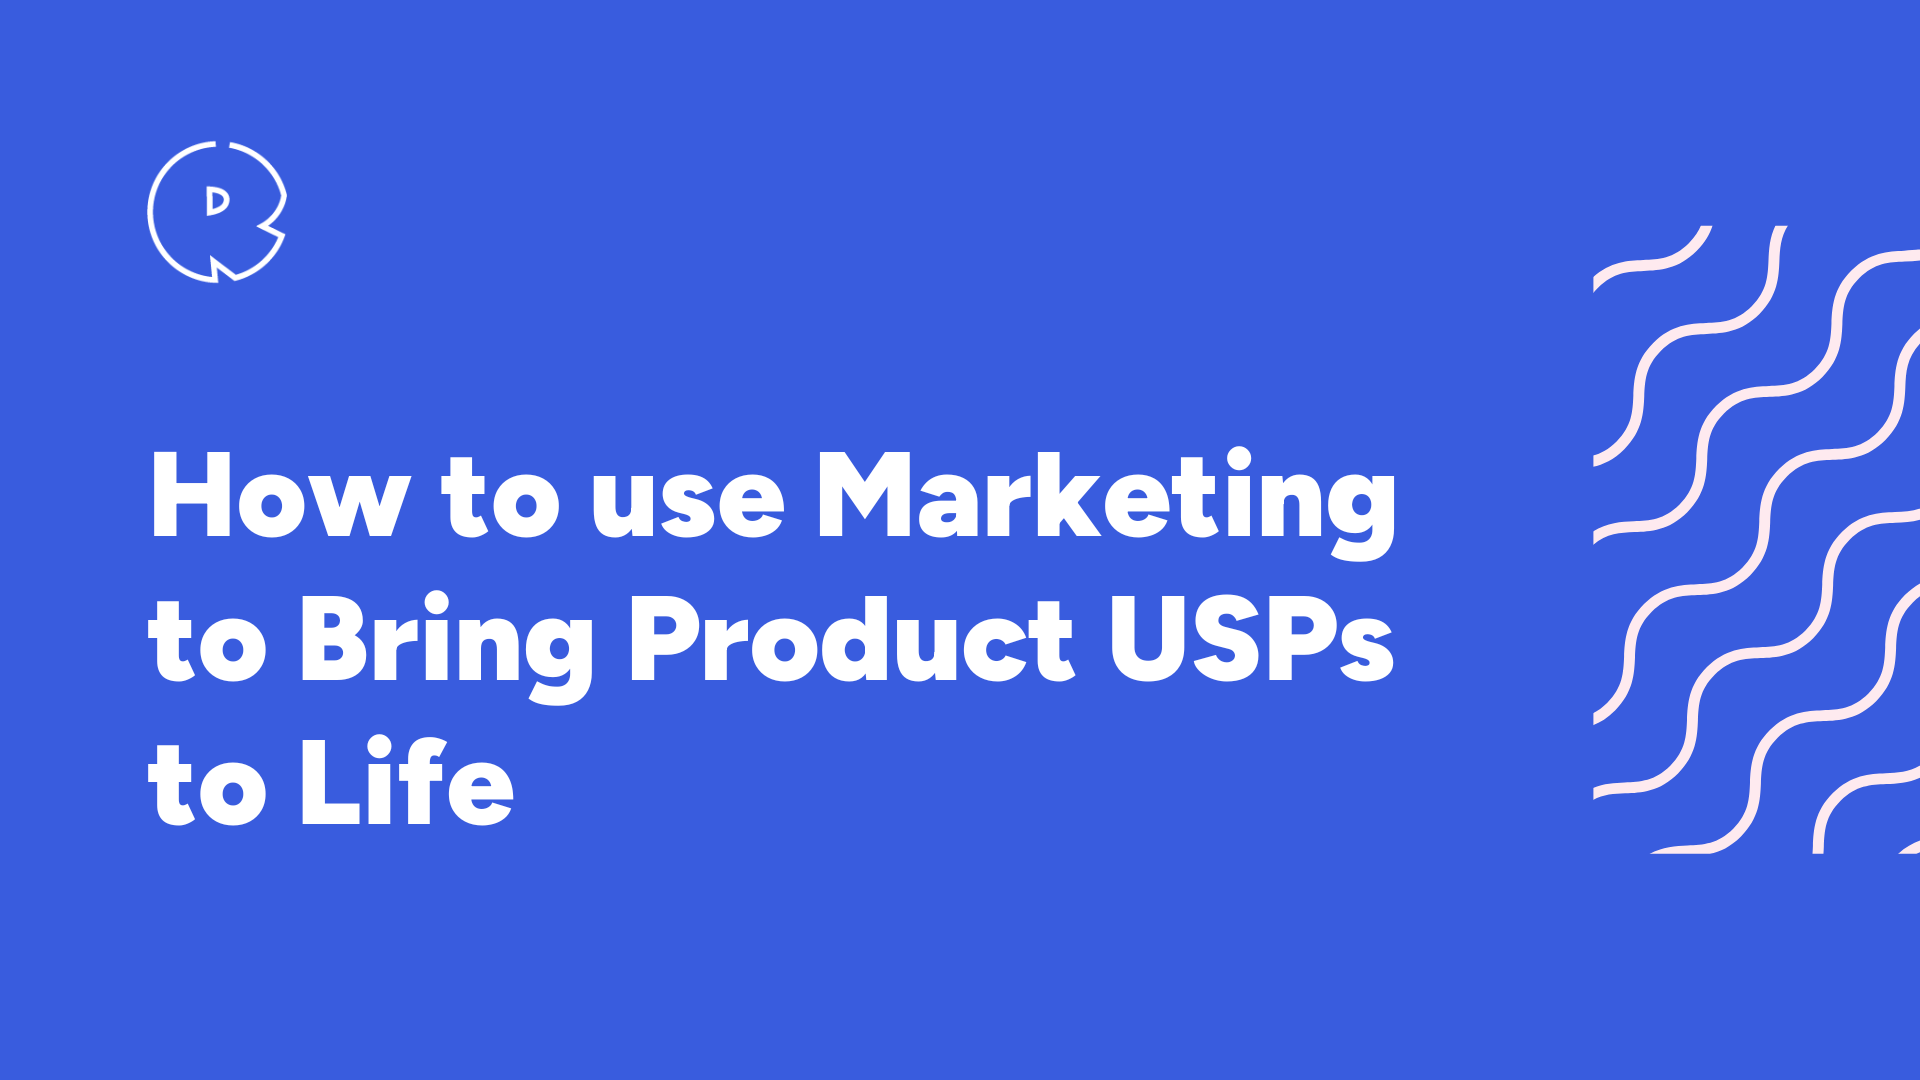 How to Use Marketing to Bring Product USPs to Life